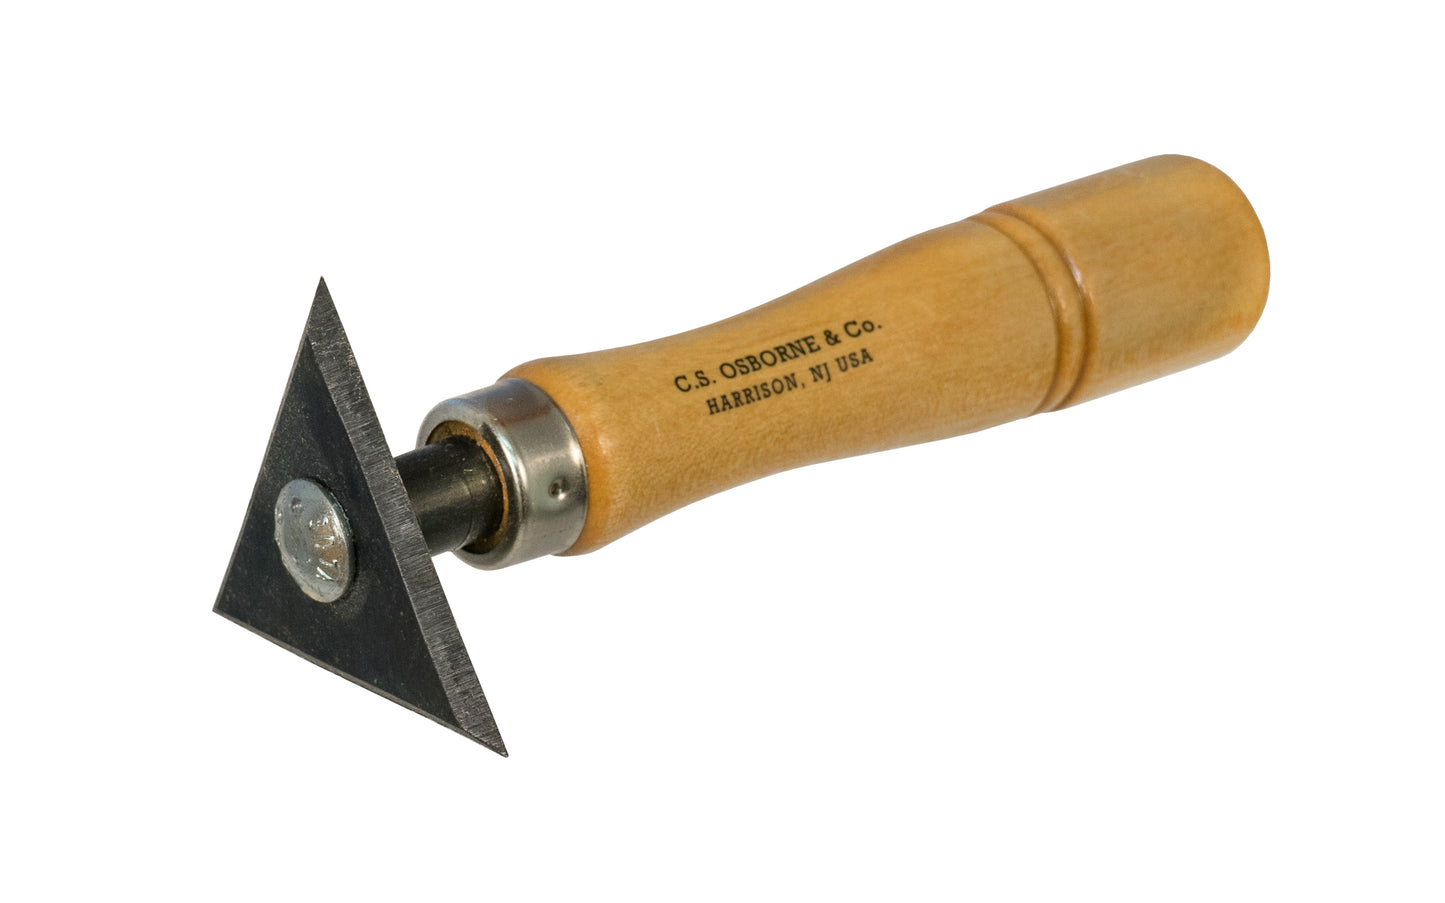 The CS Osborne Wood Scraper No. 270 has a triangle scraper blade and lacquered hardwood handle with nickel plated ferrule. Made in USA ~ 096685591322